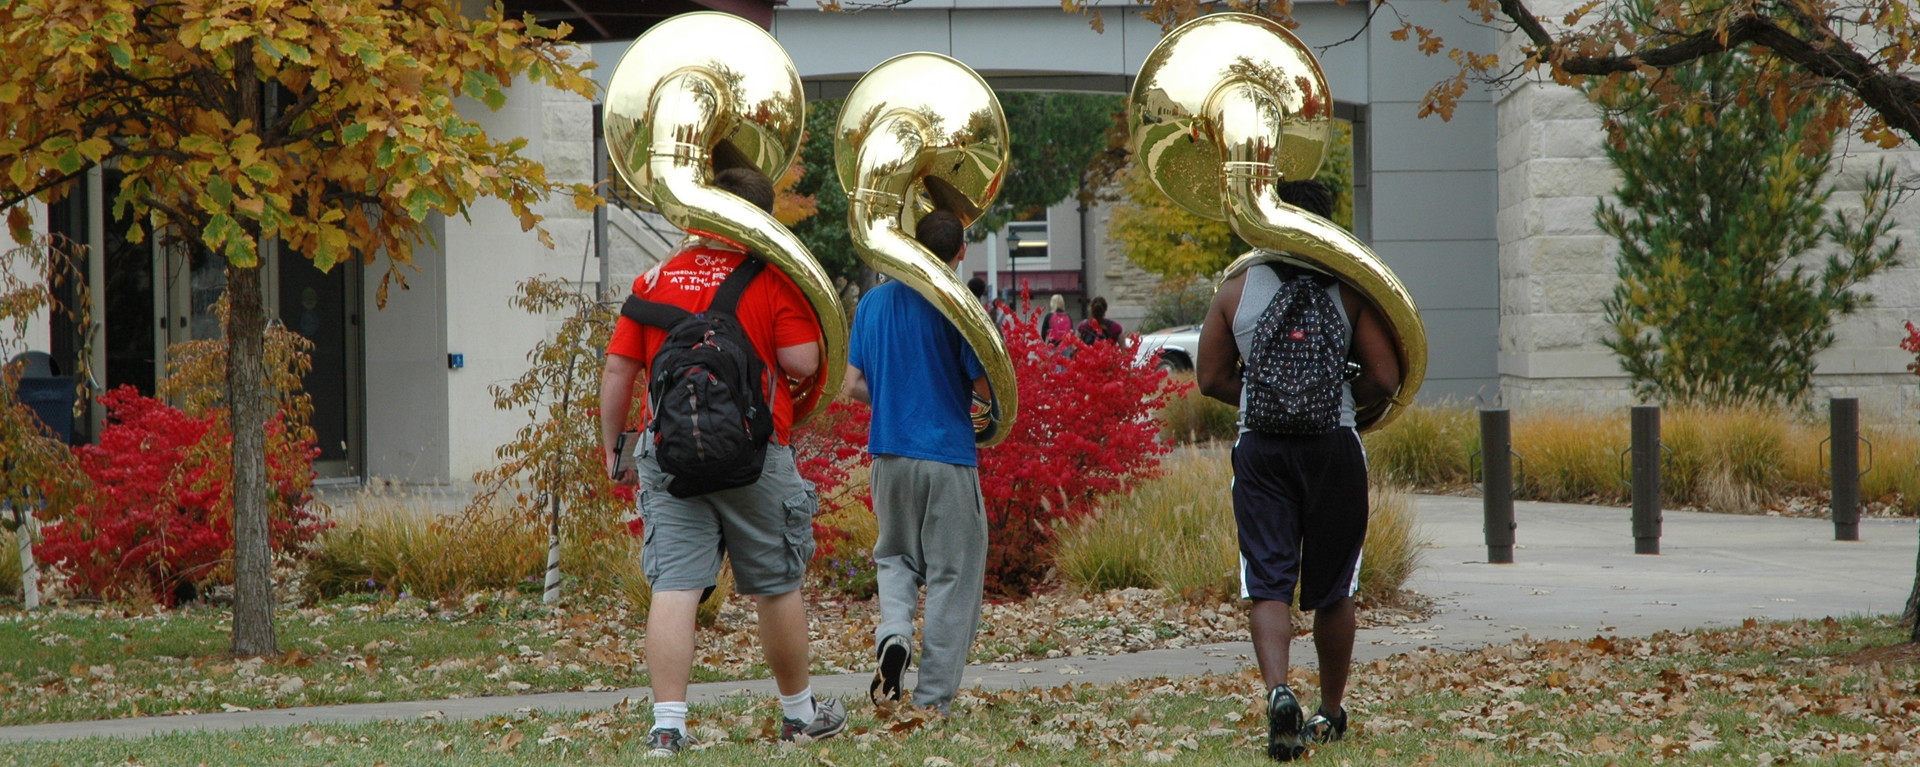 Students Walking with Tubas